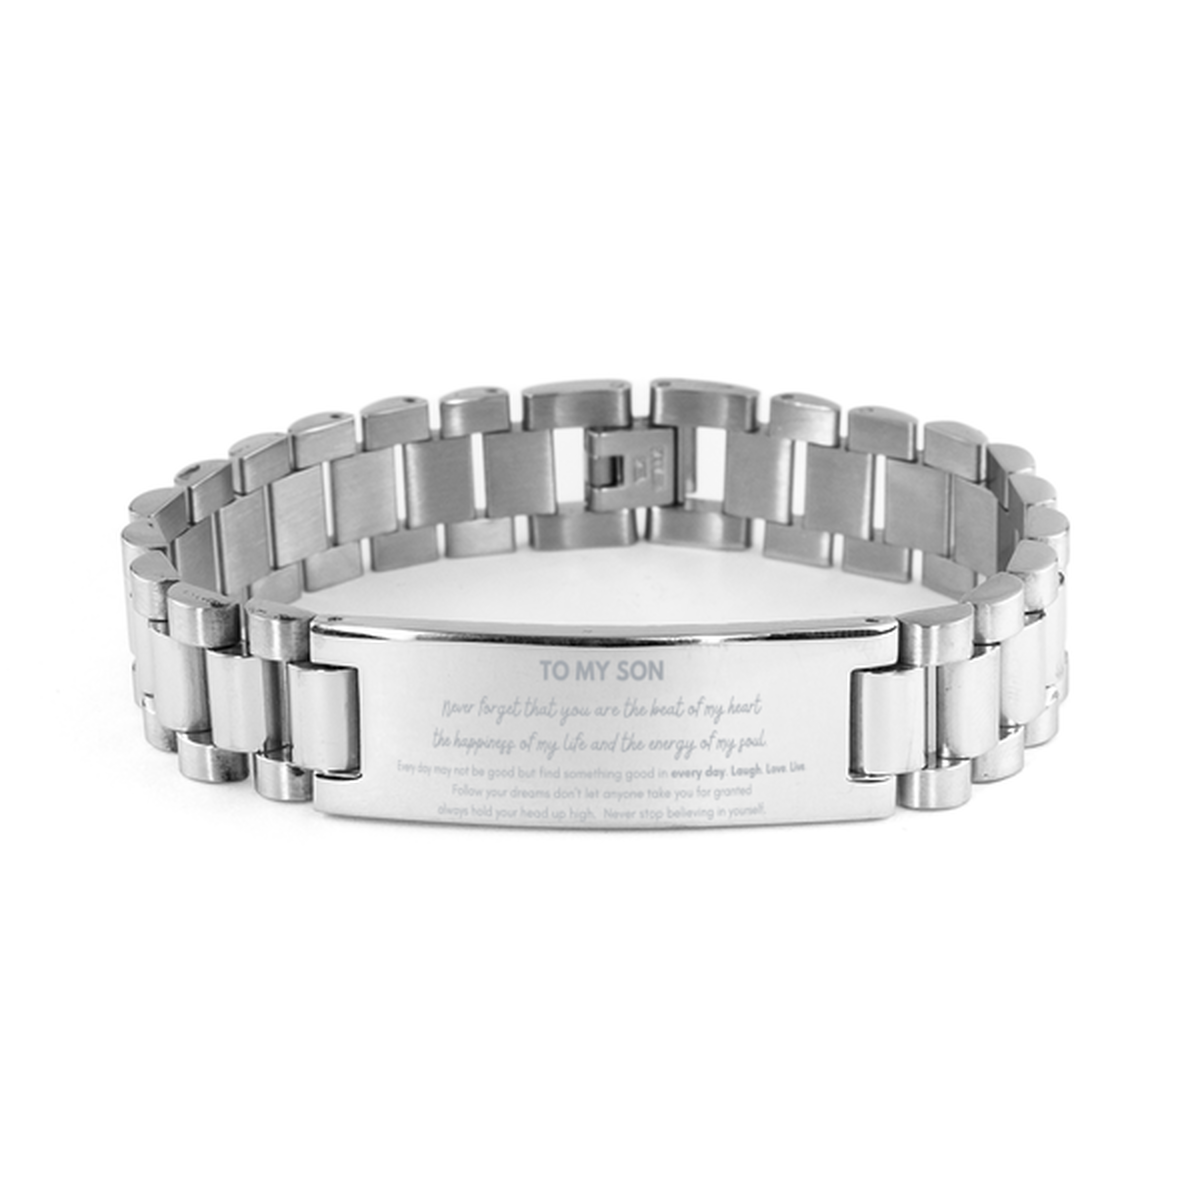 To My Son Bracelet Gifts, Christmas Son Ladder Stainless Steel Bracelet Present, Birthday Unique Motivational For Son, To My Son Never forget that you are the beat of my heart the happiness of my life and the energy of my soul